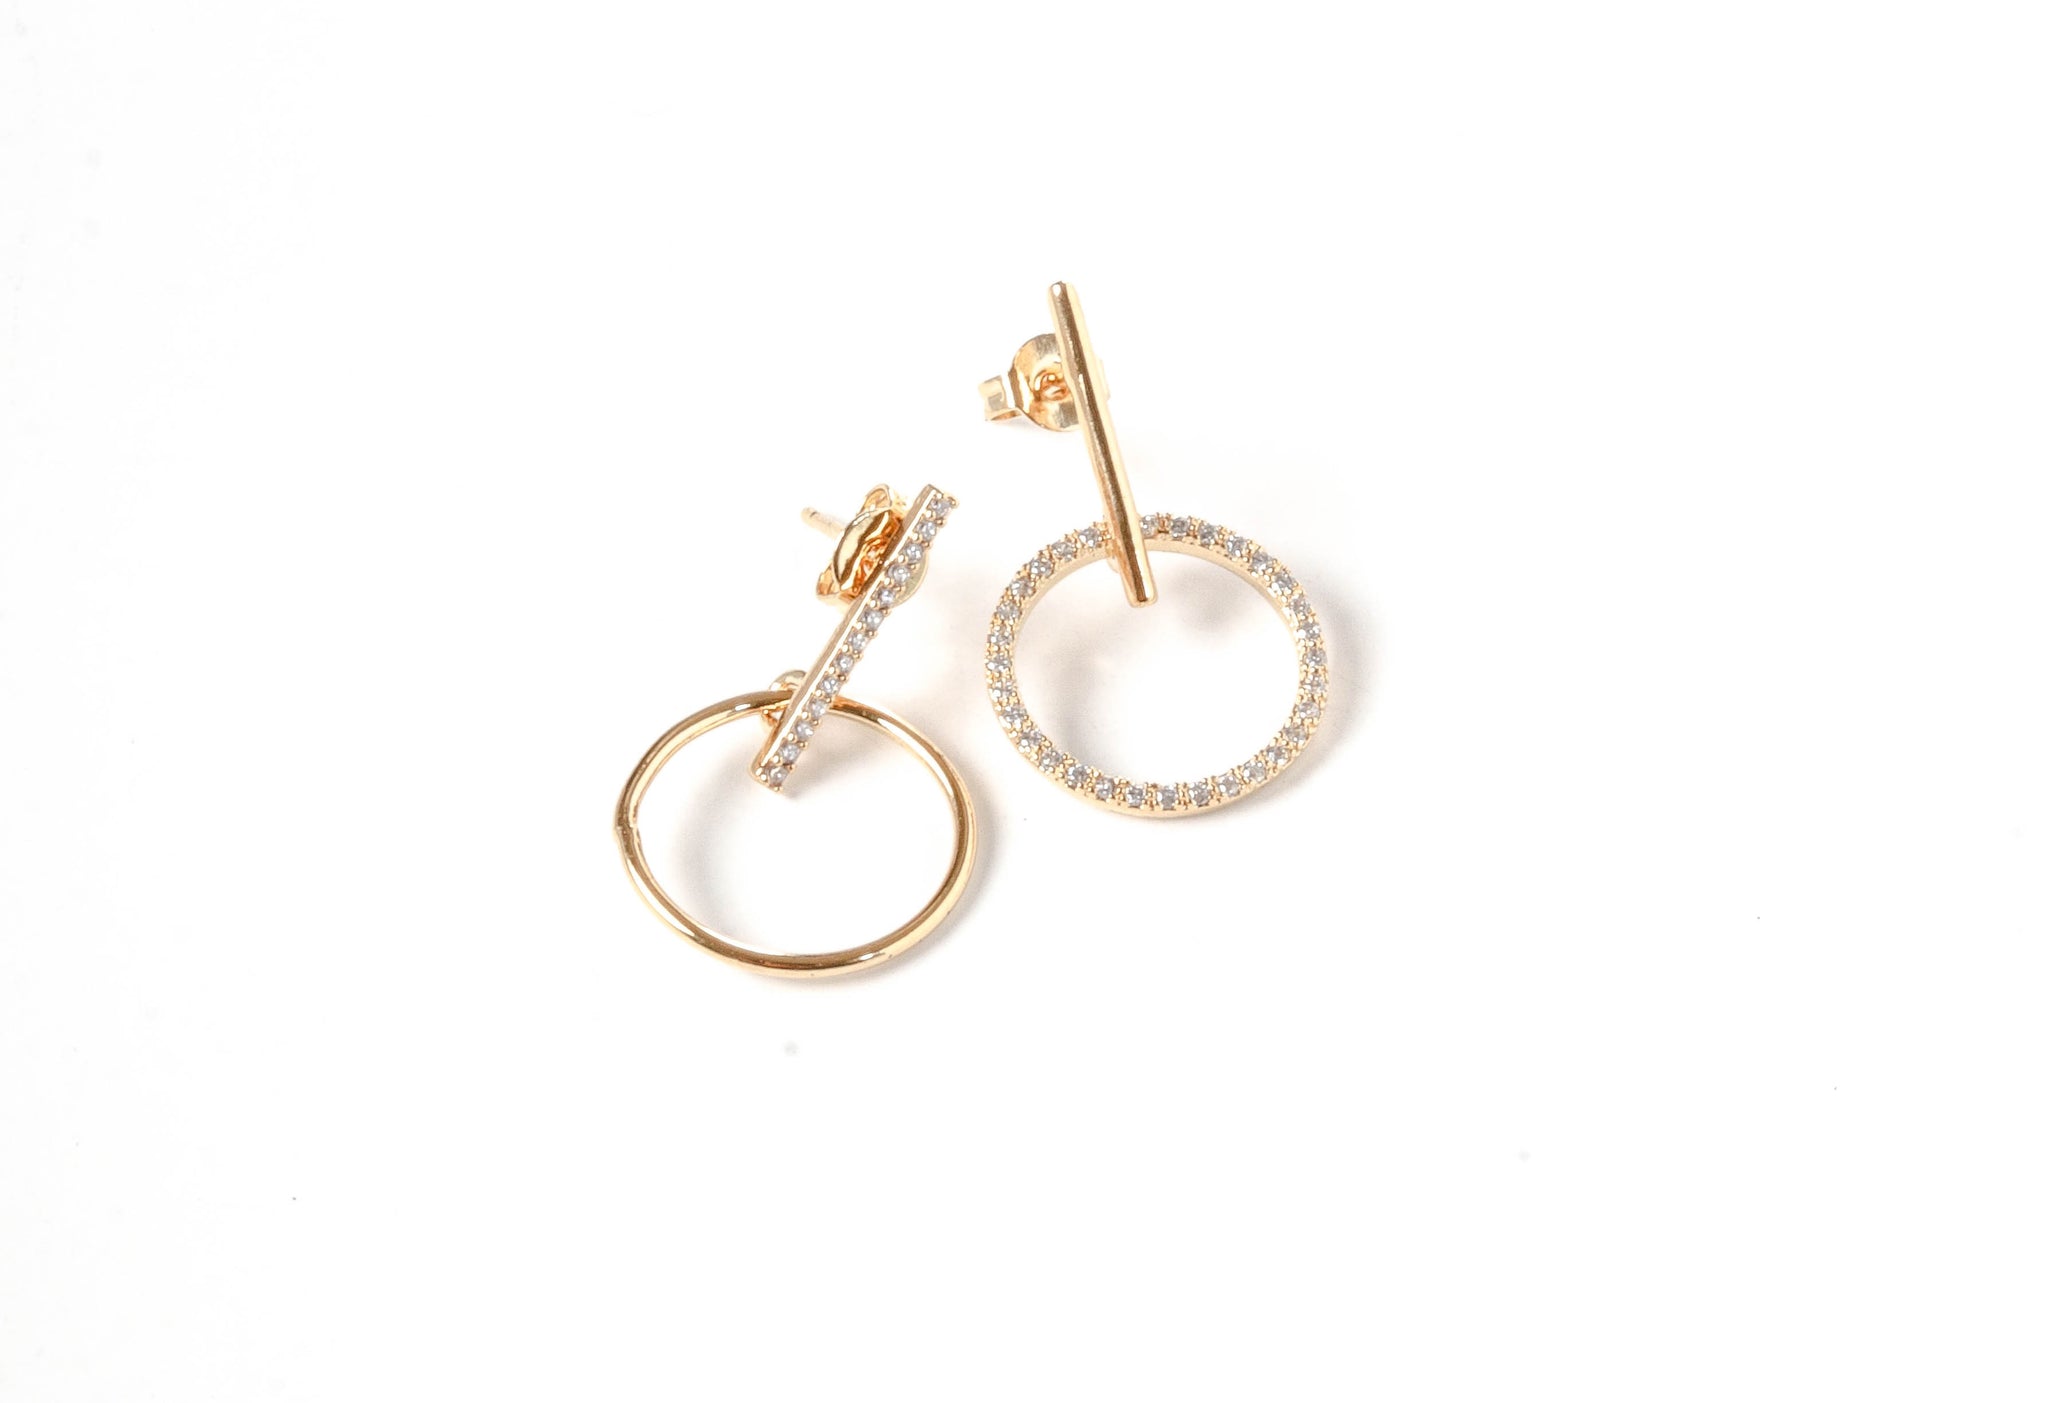 Delicate Circle Charm Earrings in Gold 